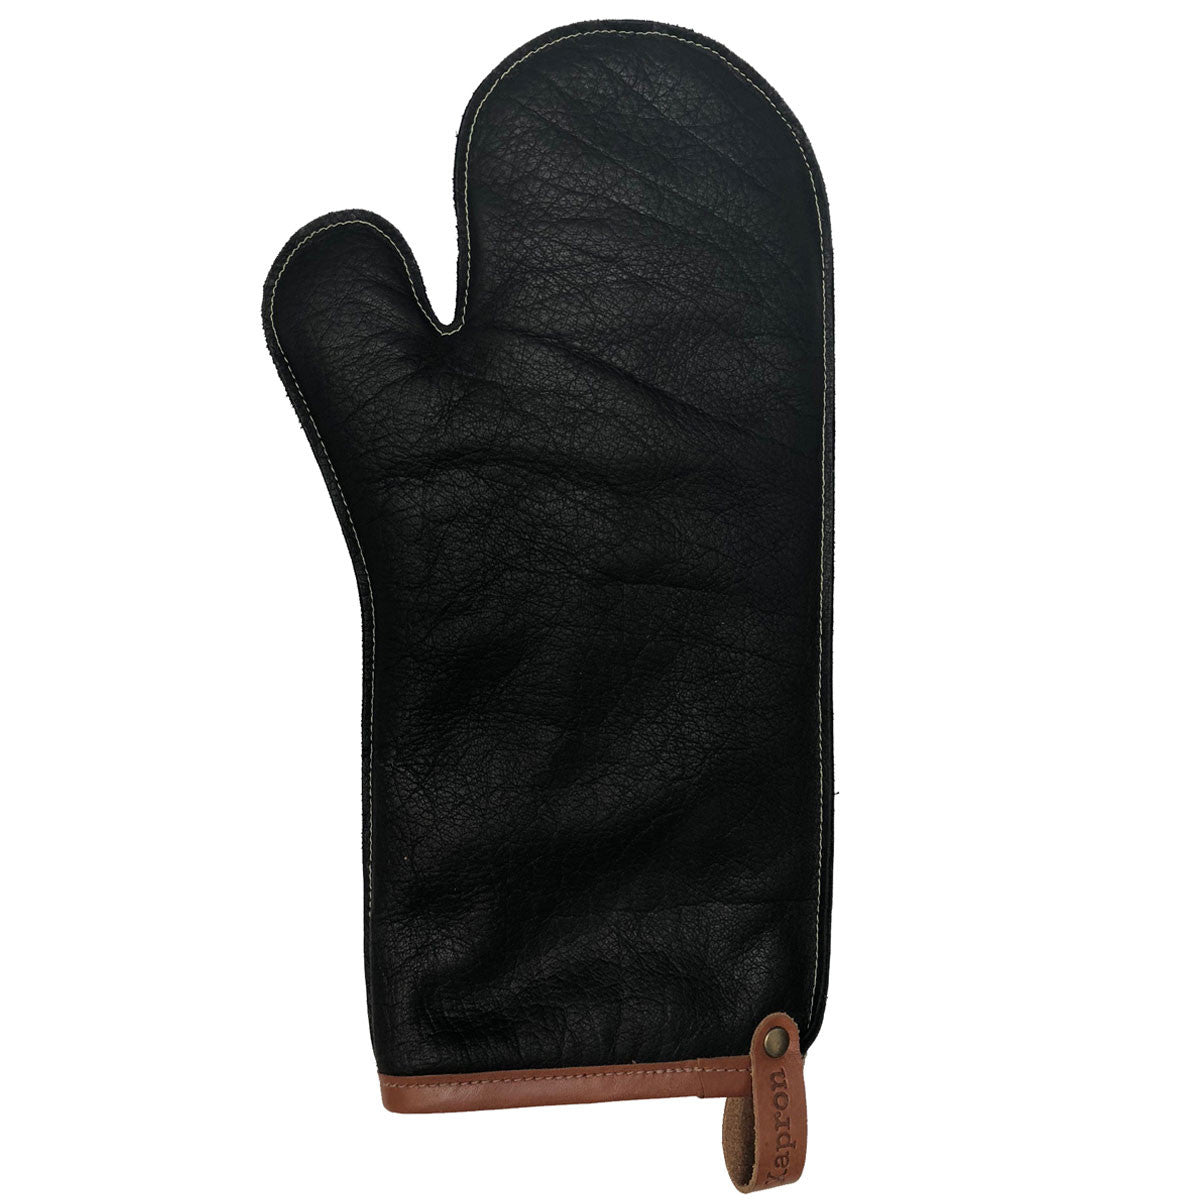 OVEN GLOVE LONG, leather black